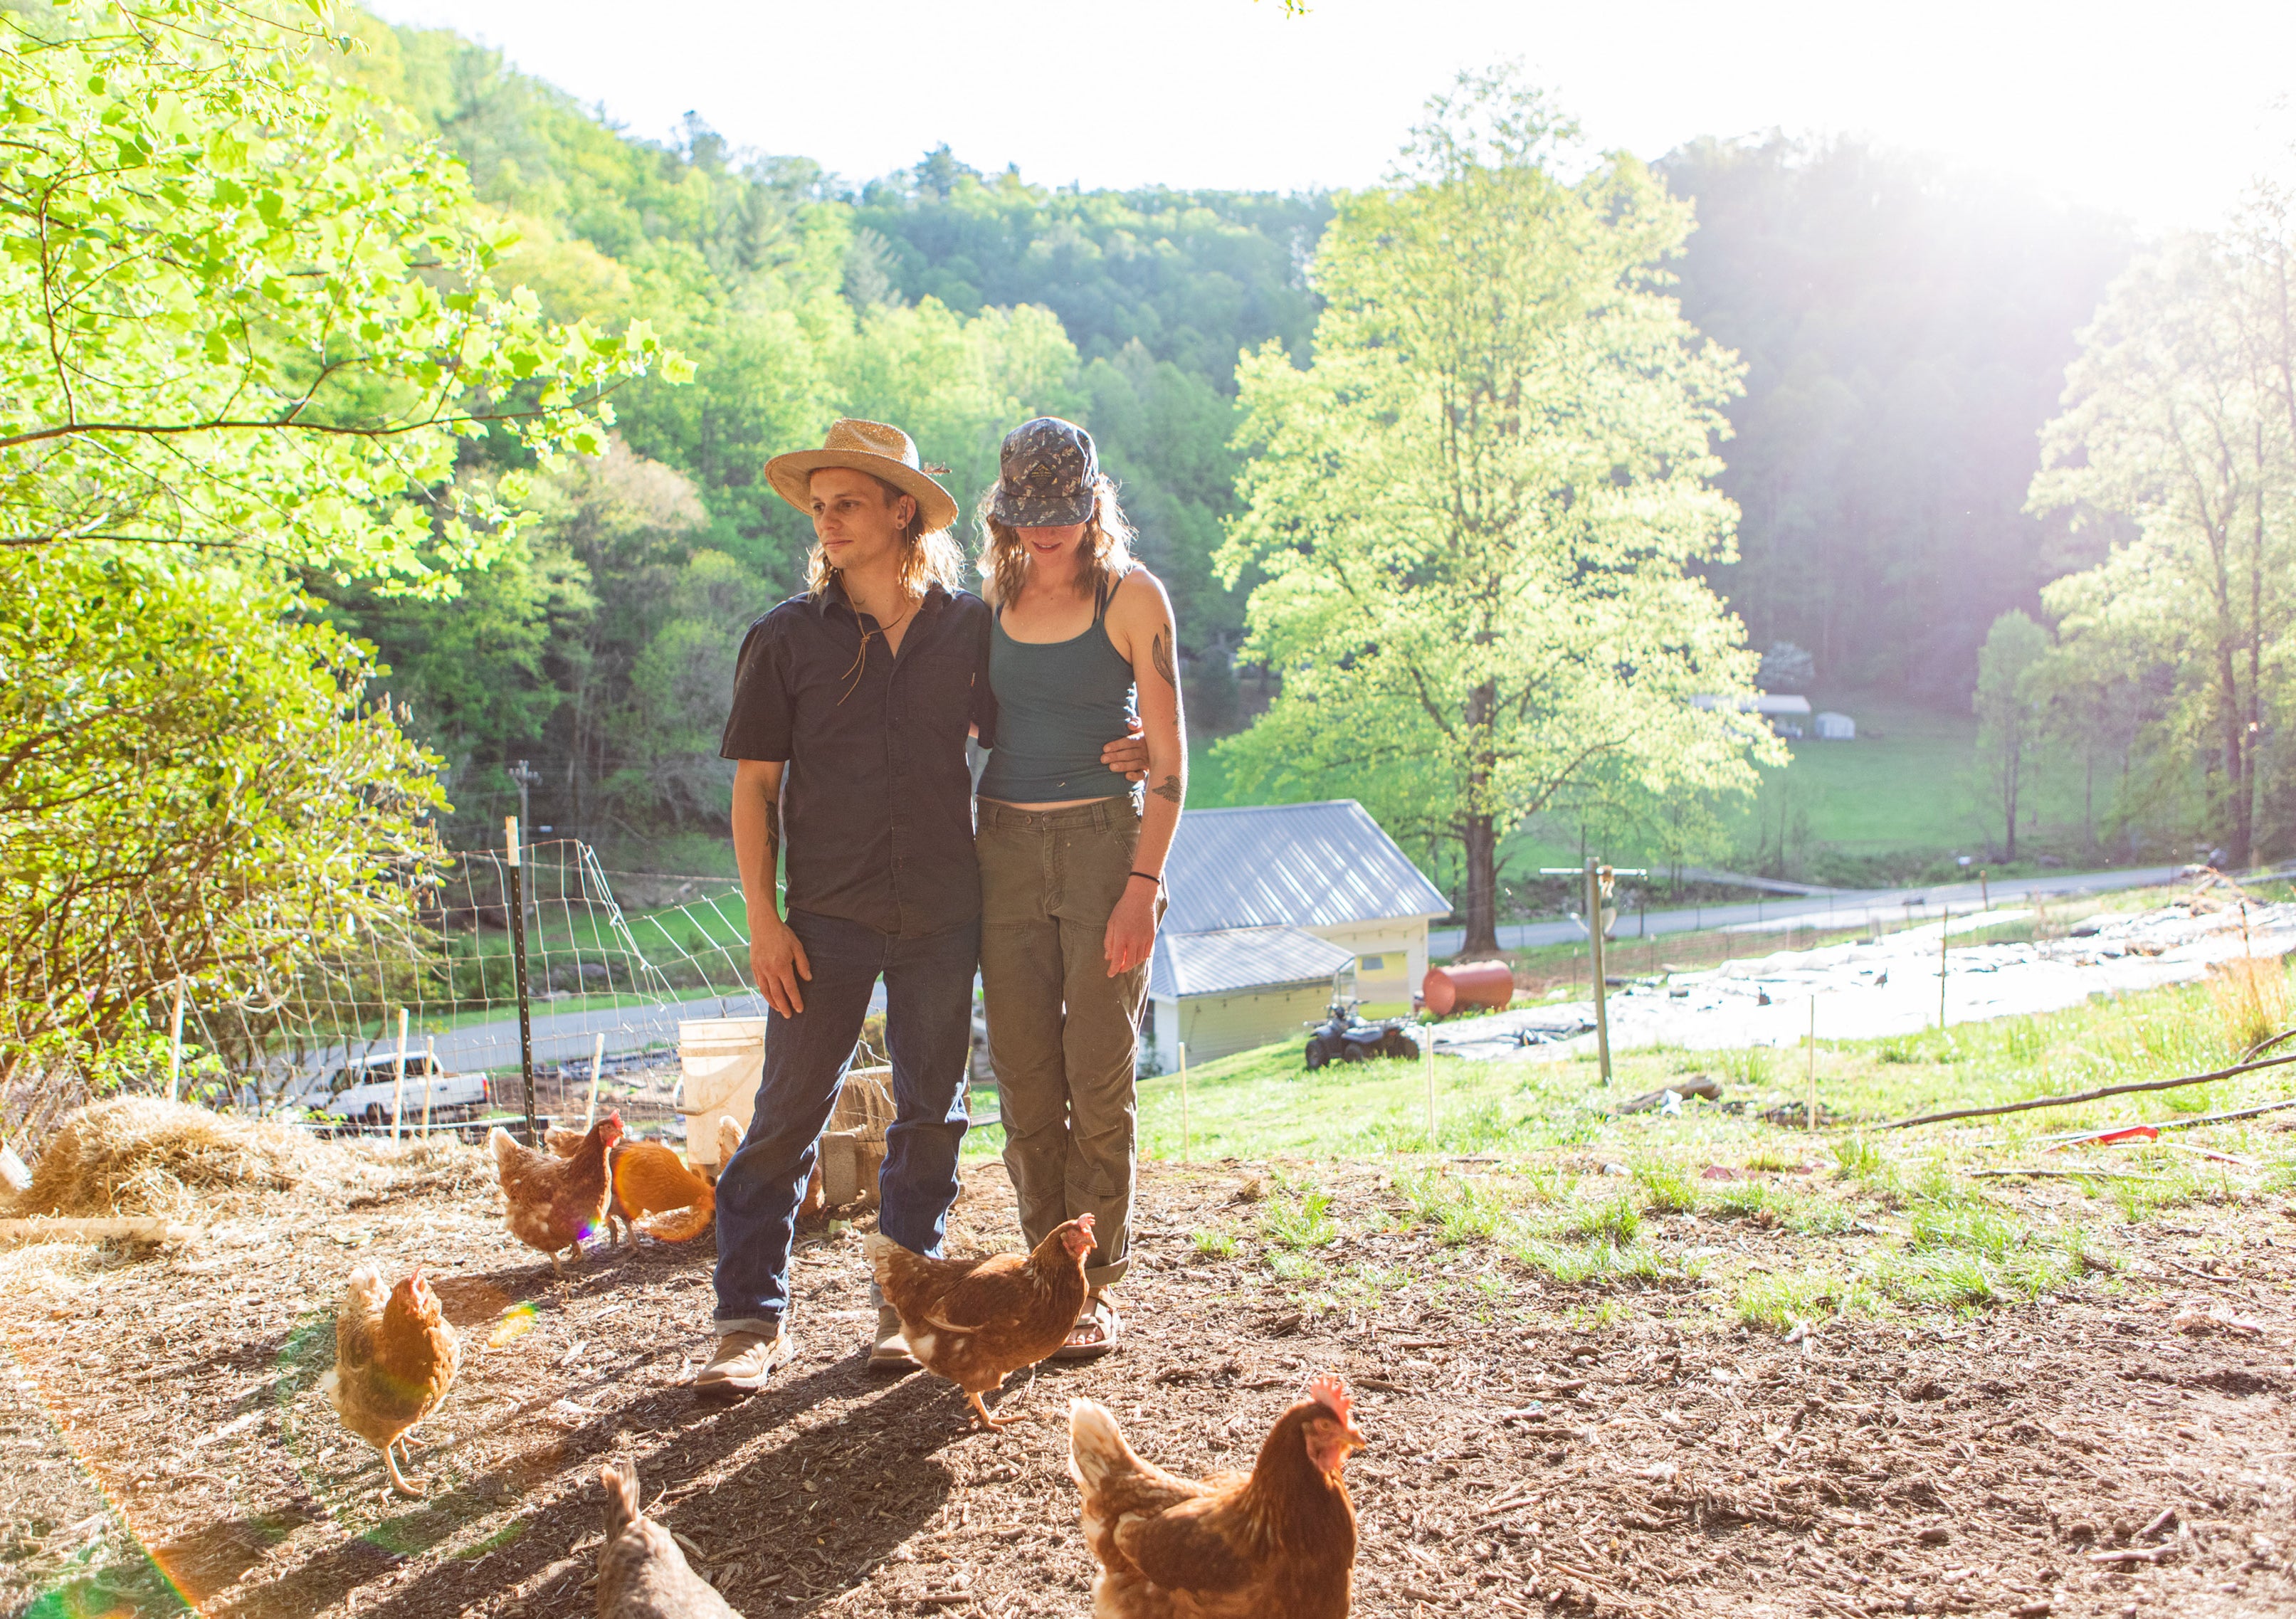 Alex O’Neill, left, and Jess McClelland on their 16-acre property in Triplett, North Carolina